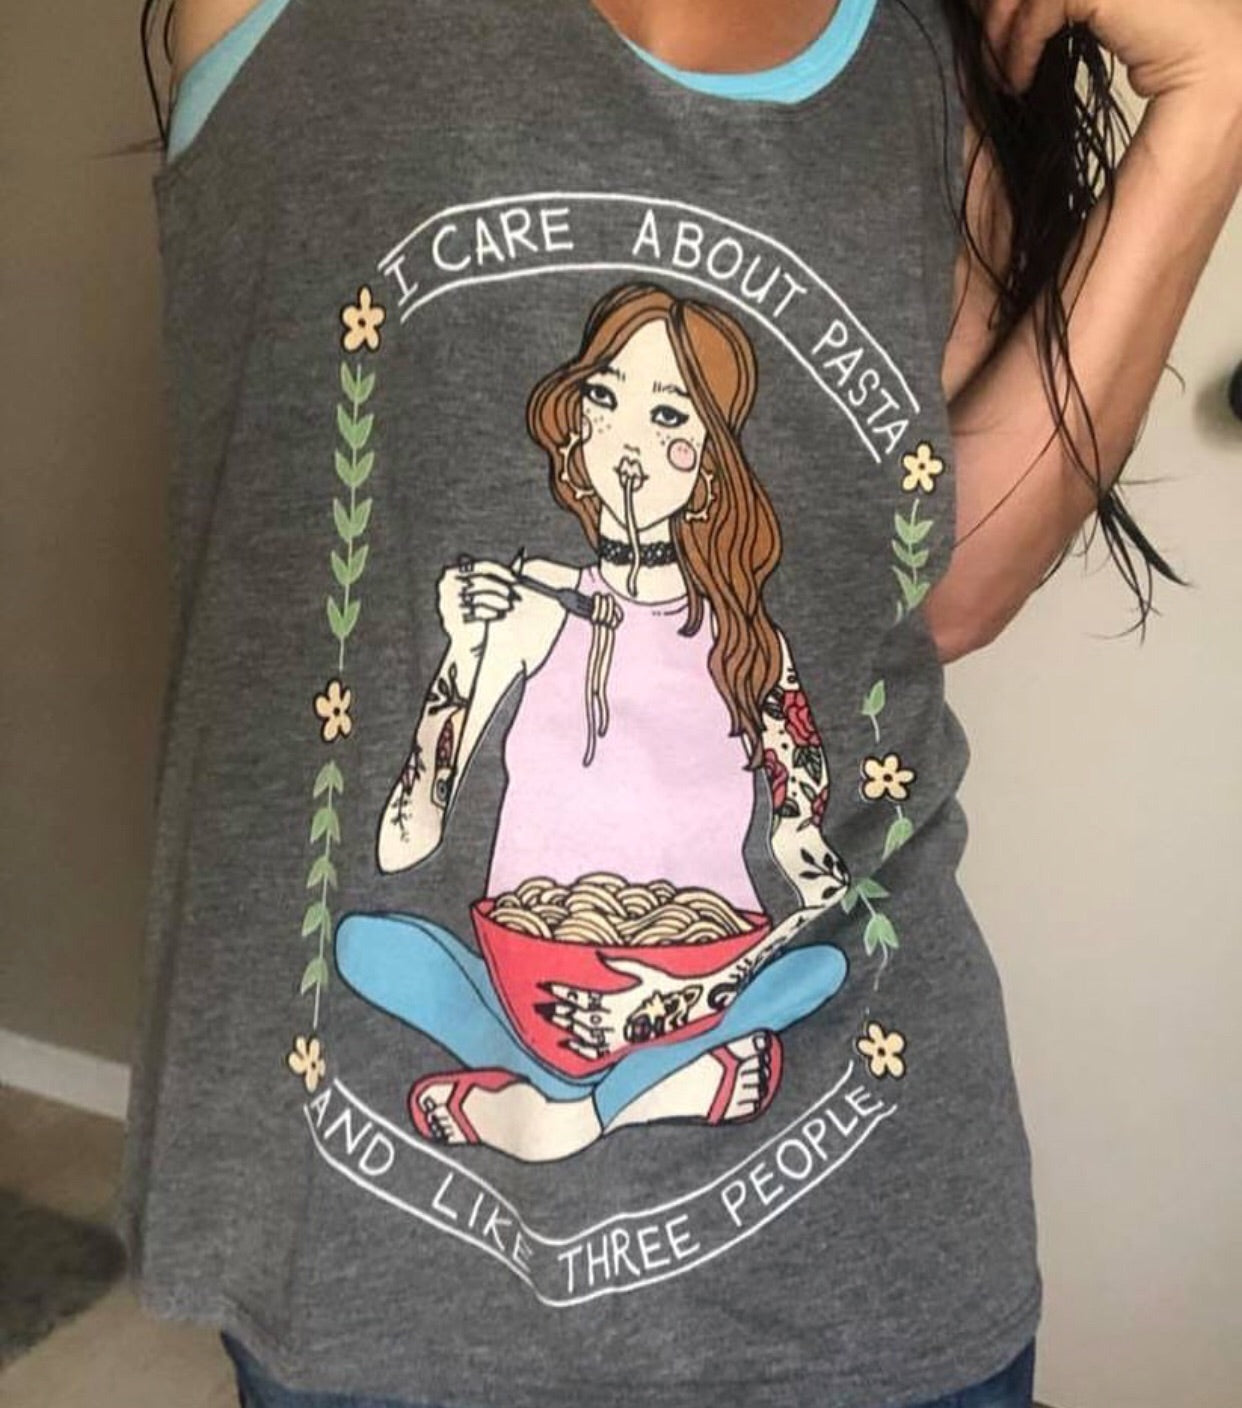 « I CARE ABOUT PASTA AND LIKE 3 PEOPLE » SLOUCHY or RACERBACK TANK